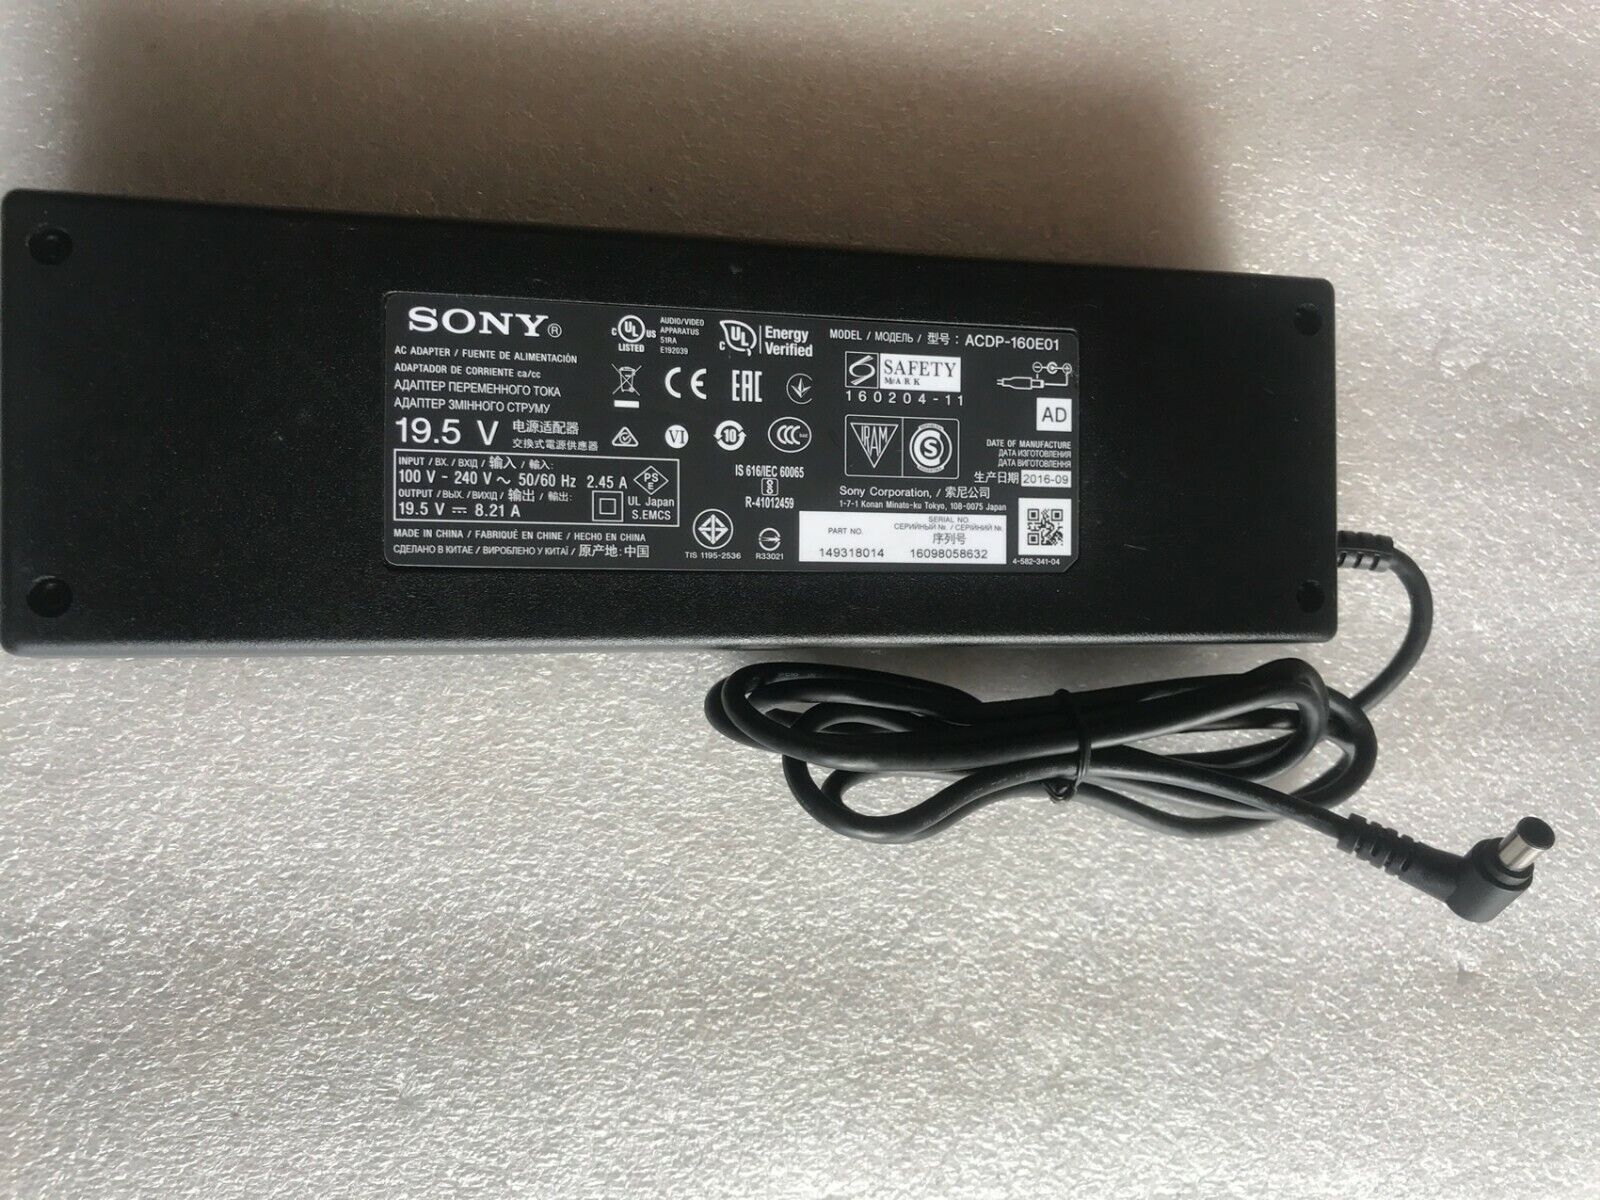 New Original Sony 19.5V AC/DC Adapter for Sony Bravia XBR-55X850D ACDP-160E01 TV Compatible Brand: For Sony Brand: